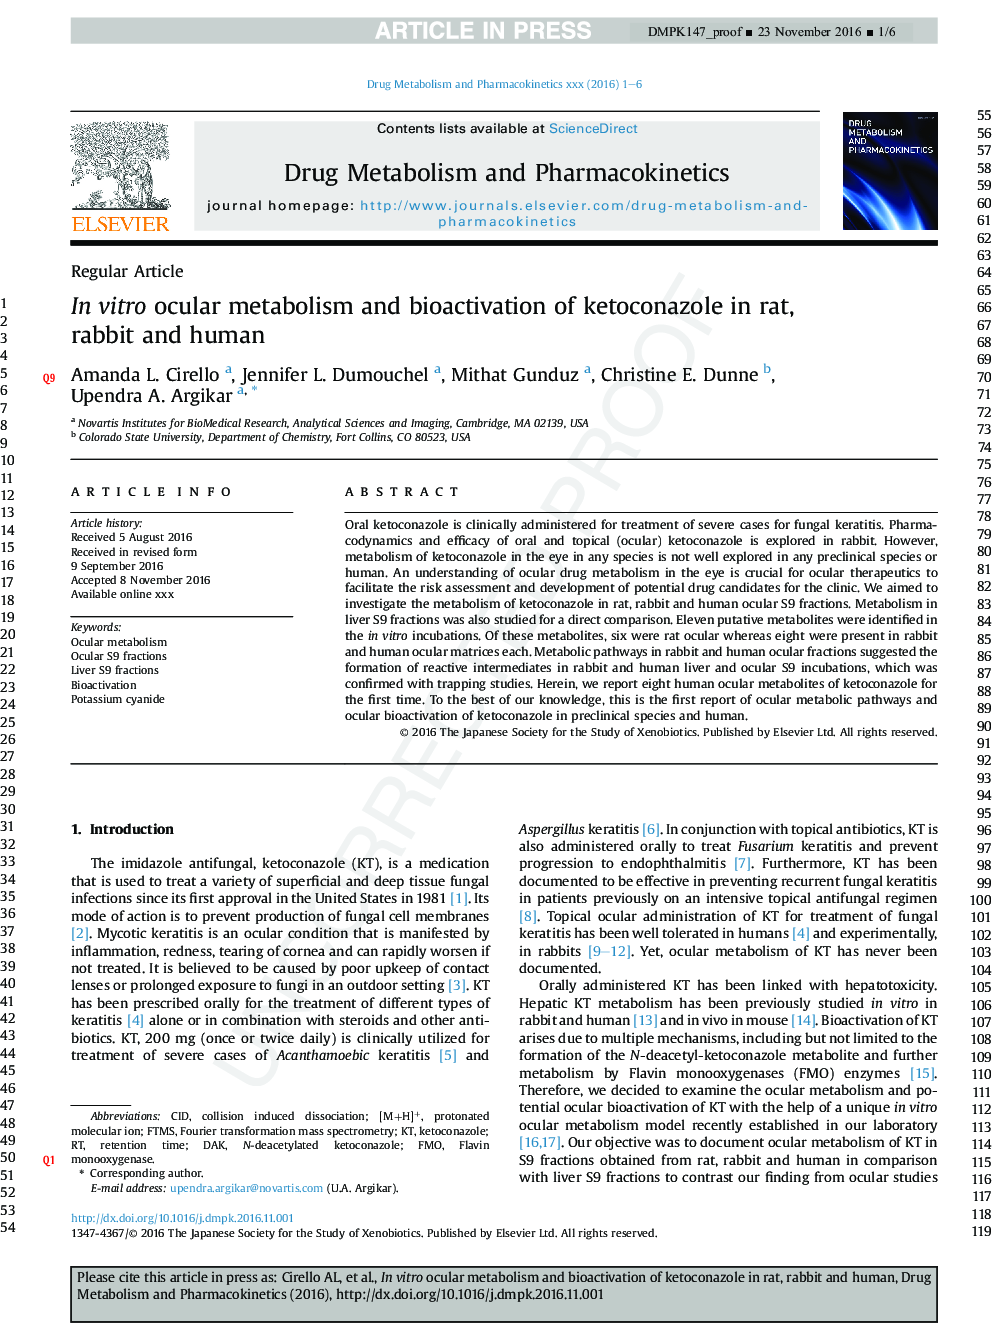 InÂ vitro ocular metabolism and bioactivation of ketoconazole in rat, rabbit and human